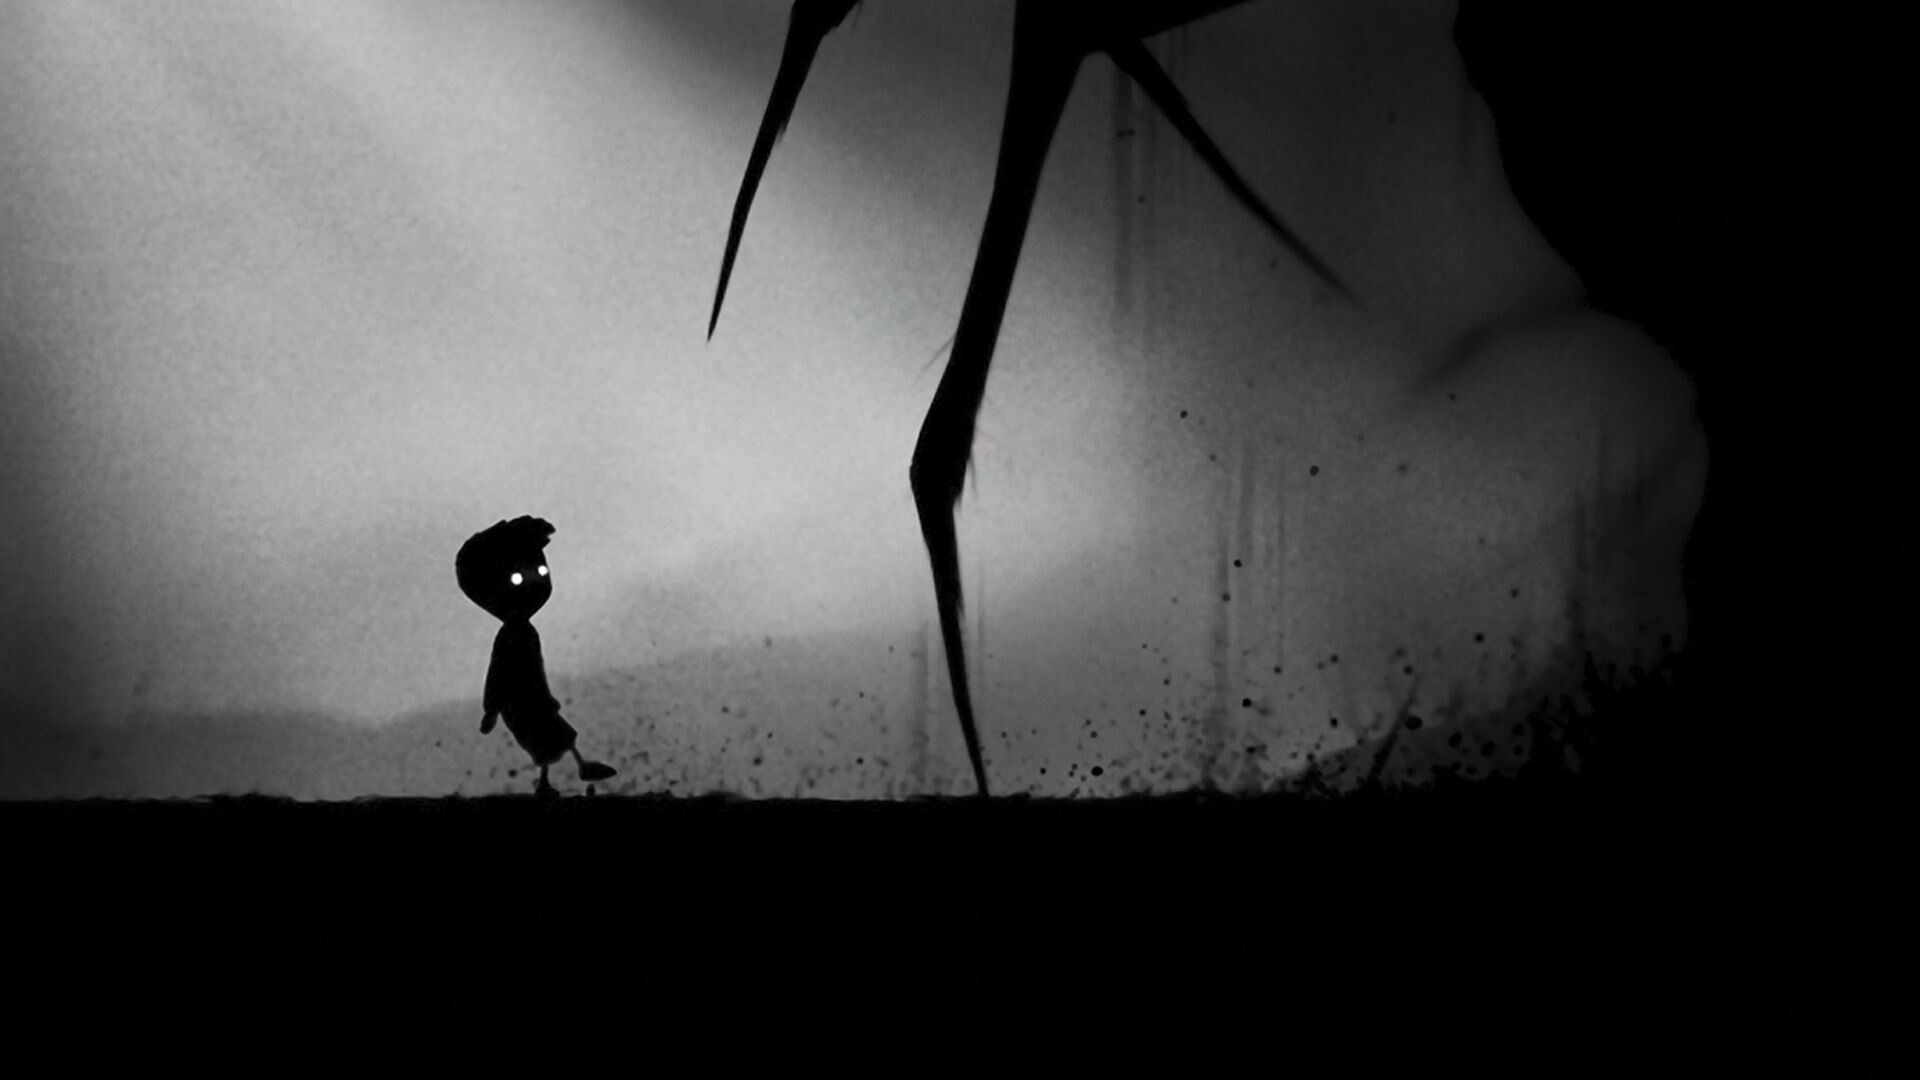 Limbo: It was named as one of ten games for the publicly voted 2011 "Game of the Year" BAFTA Video Game Awards. 1920x1080 Full HD Wallpaper.